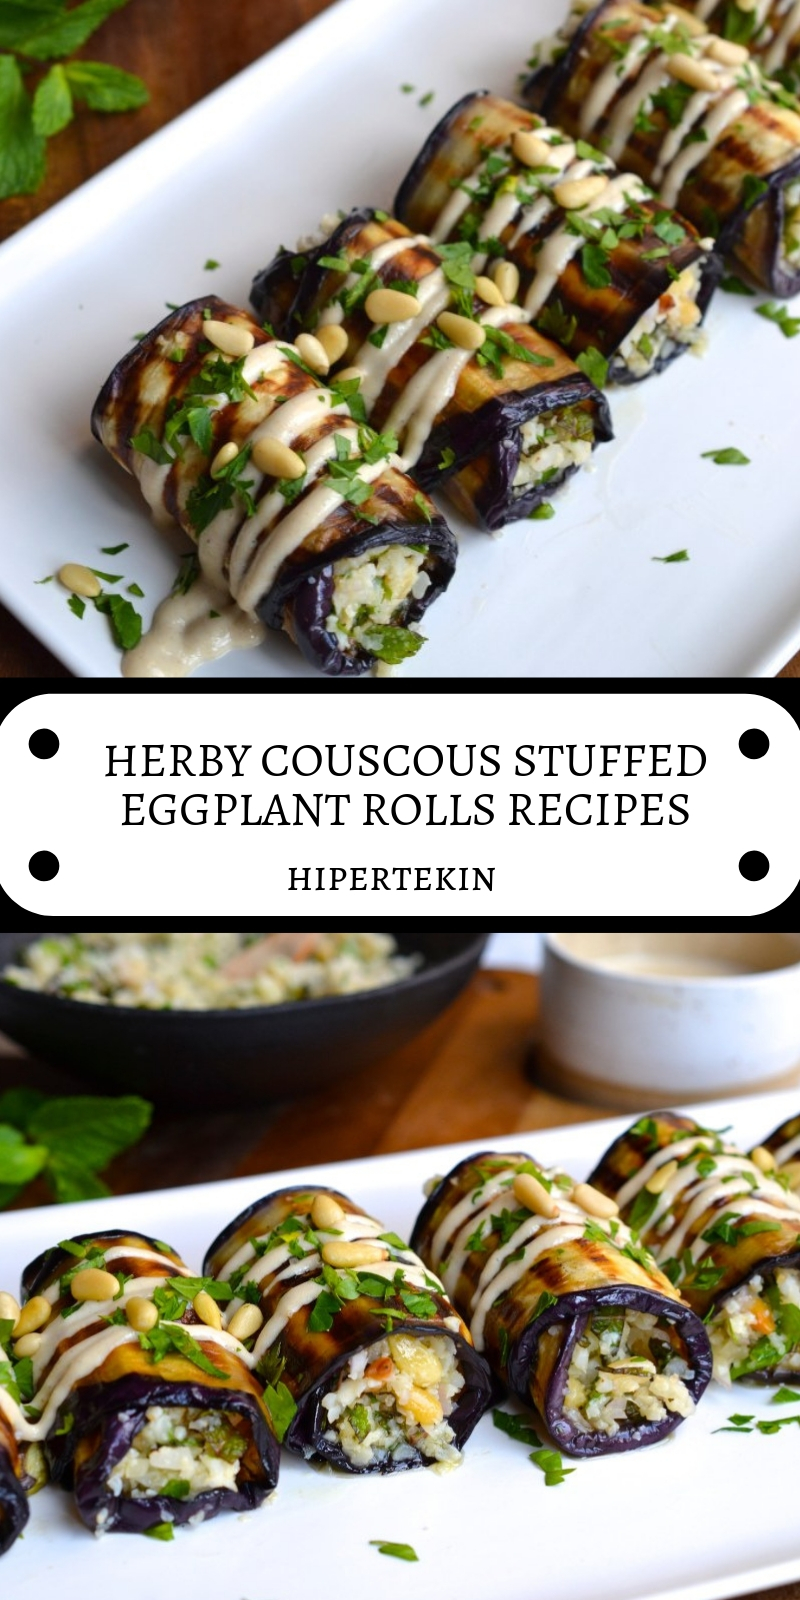 HERBY COUSCOUS STUFFED EGGPLANT ROLLS RECIPES